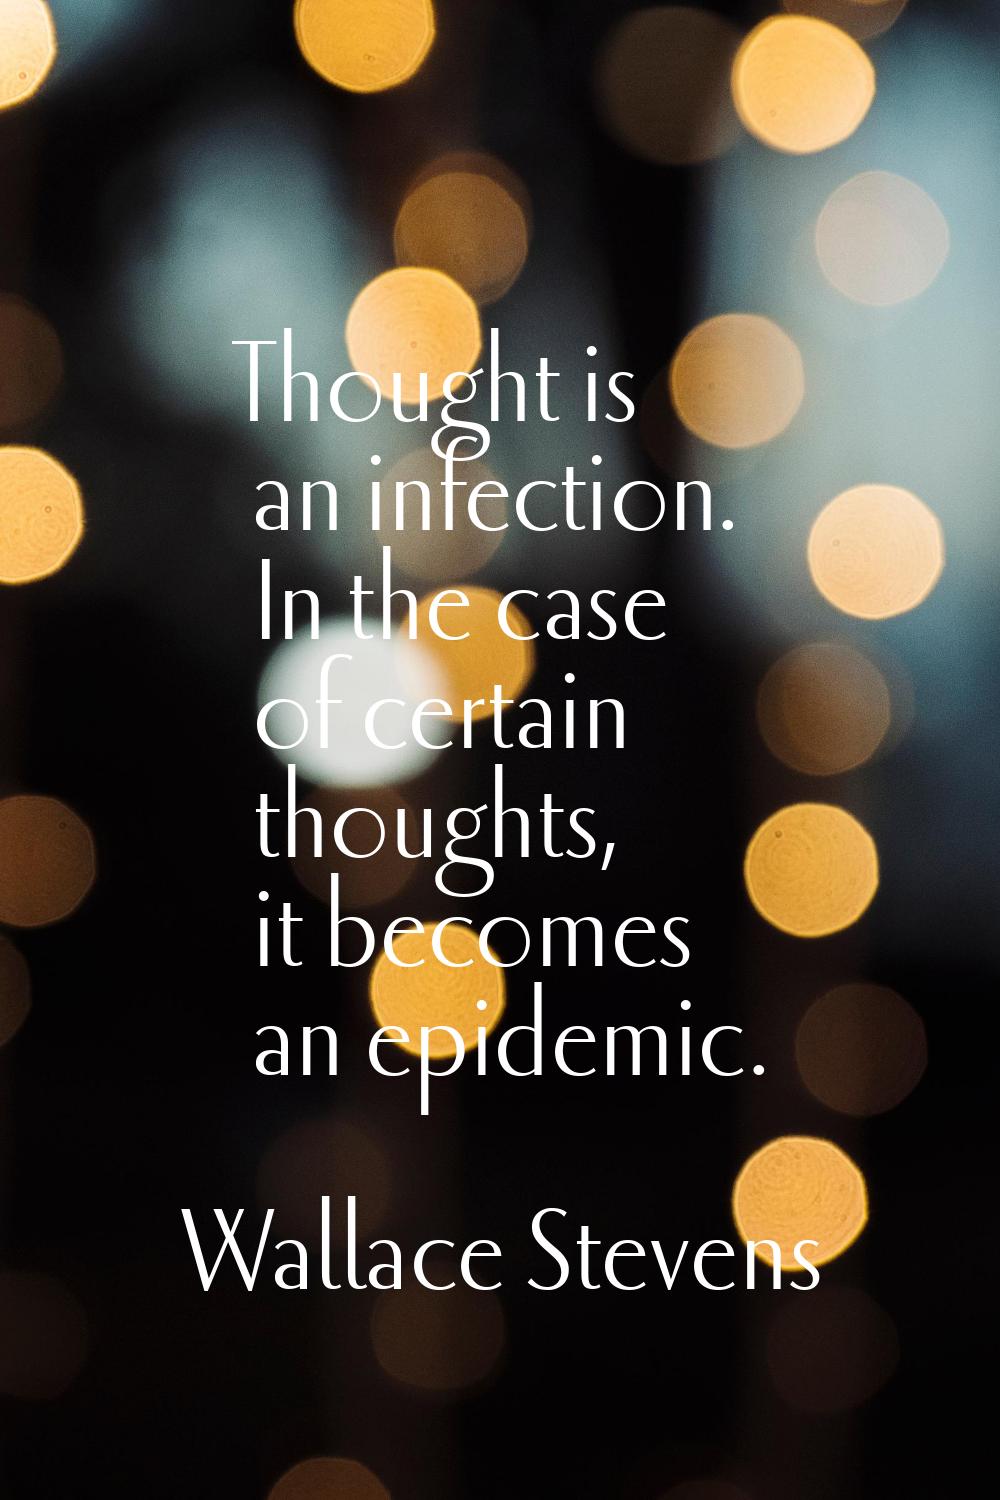 Thought is an infection. In the case of certain thoughts, it becomes an epidemic.